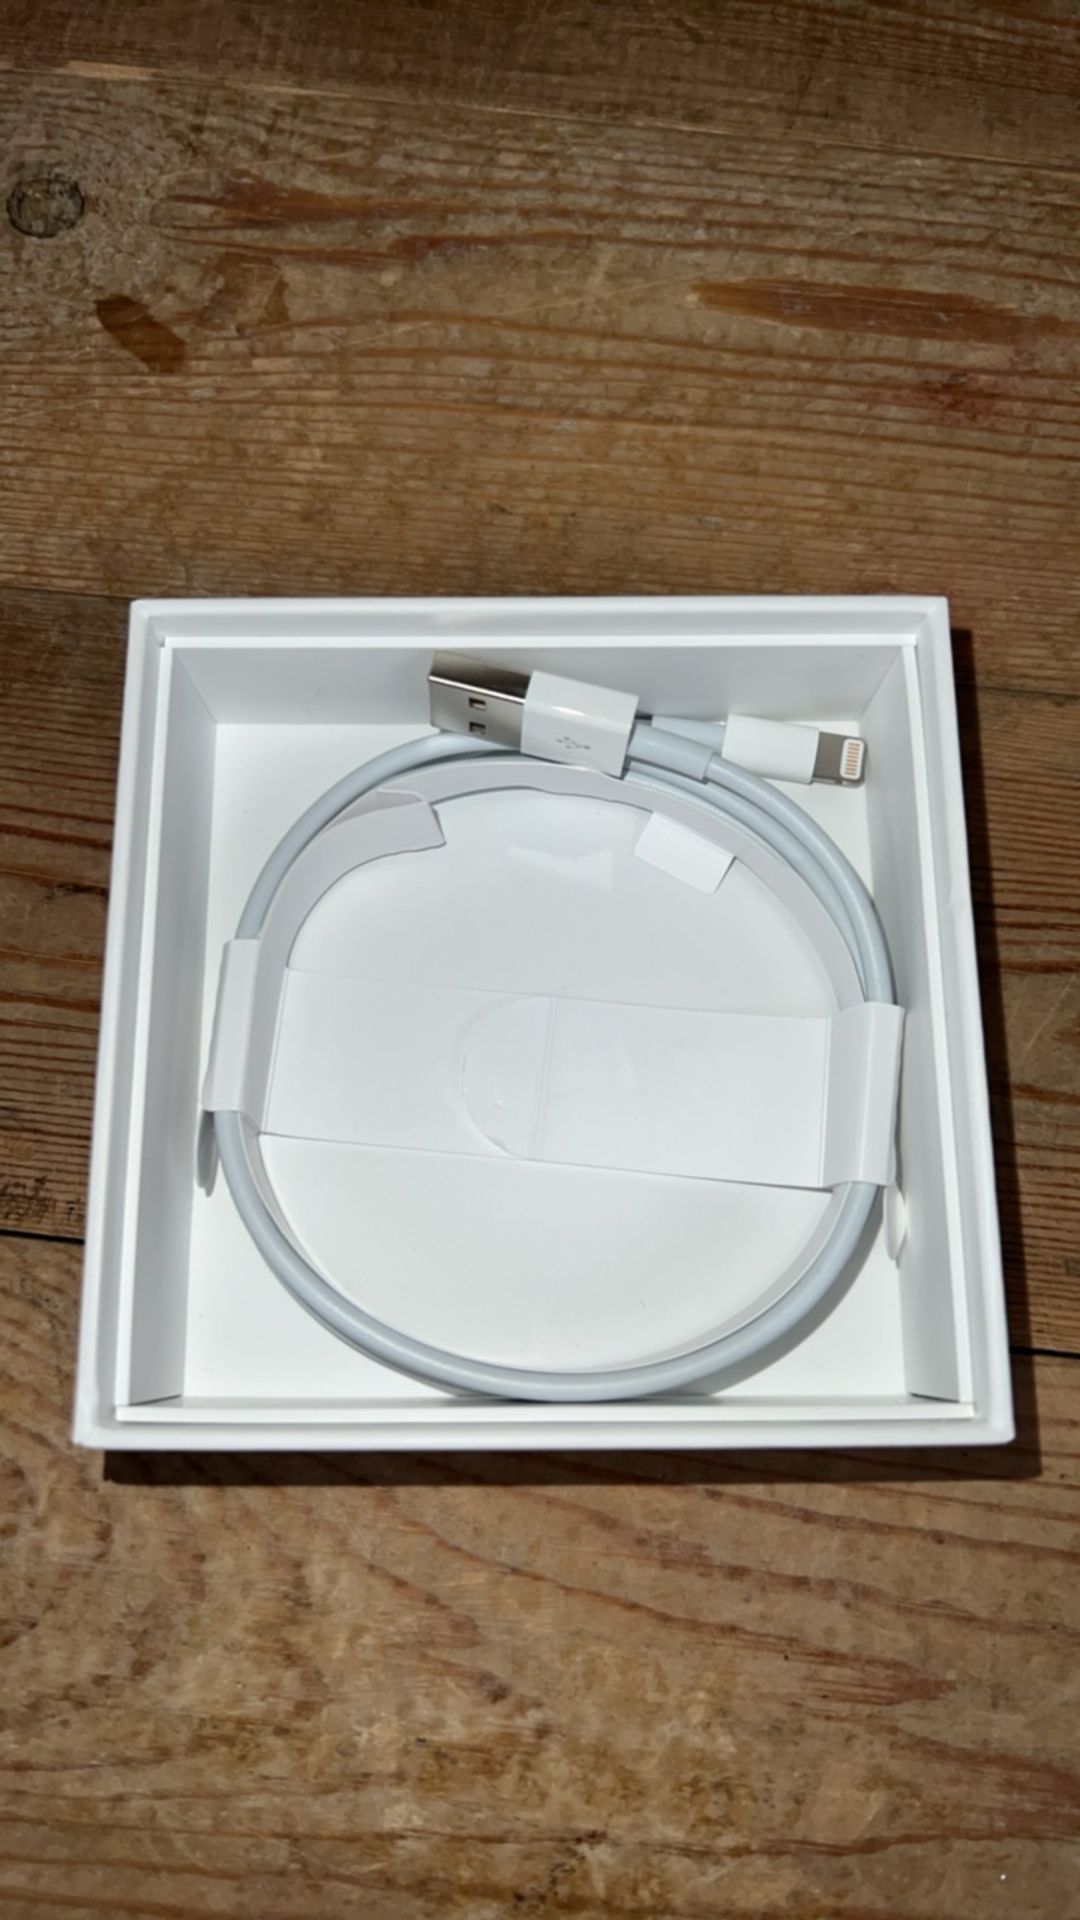 Apple Air Pods Charging Case Included - Image 5 of 5